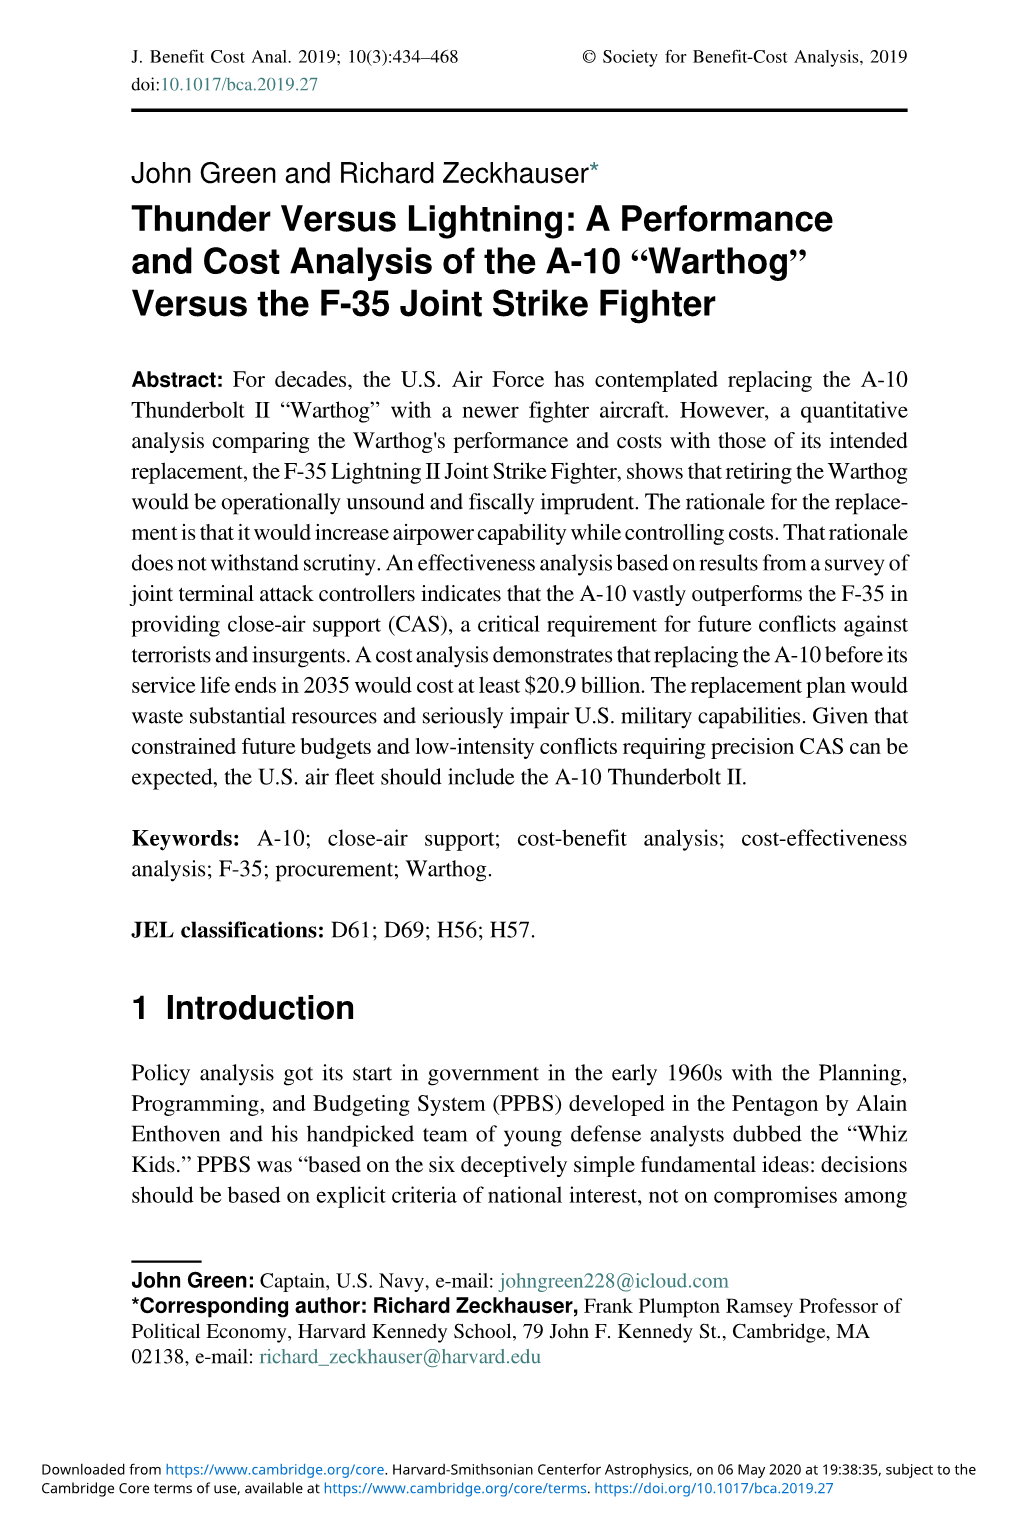 Thunder Versus Lightning: a Performance and Cost Analysis of the A-10 “Warthog” Versus the F-35 Joint Strike Fighter